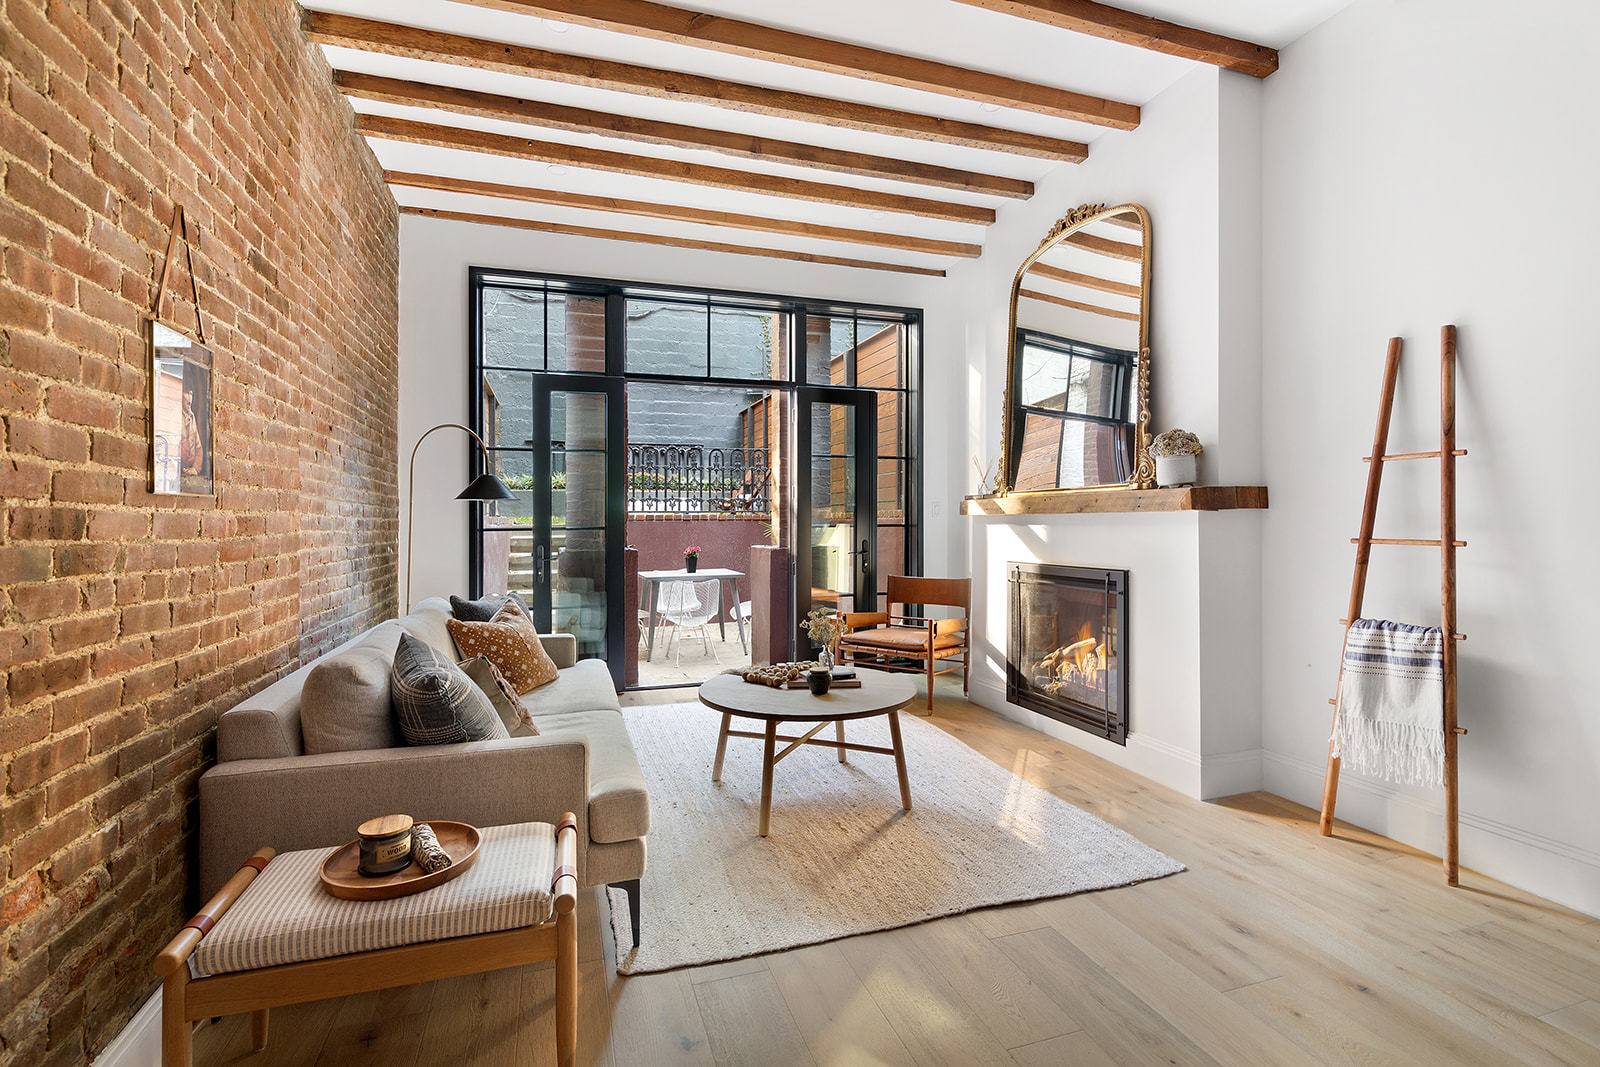 This reimagined classic Brooklyn Heights apartment captures the Brooklyn charm we have come to love and thoughtfully pairs it with the modern finishes and comforts we have come to expect.